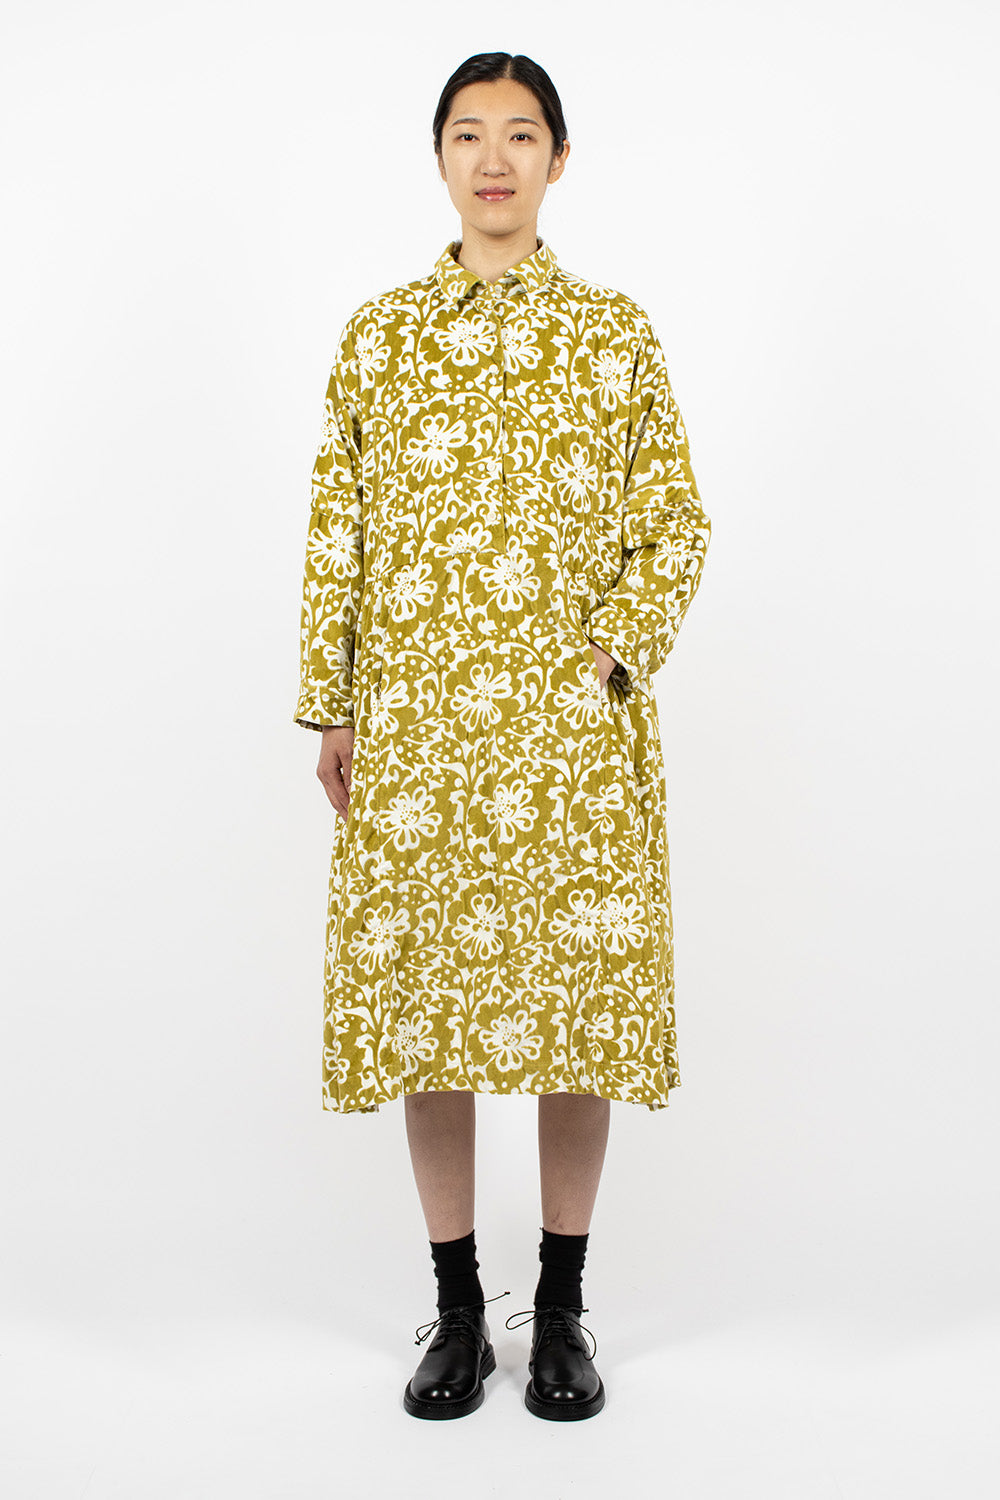 Paga Rouch Dress Acid Floral